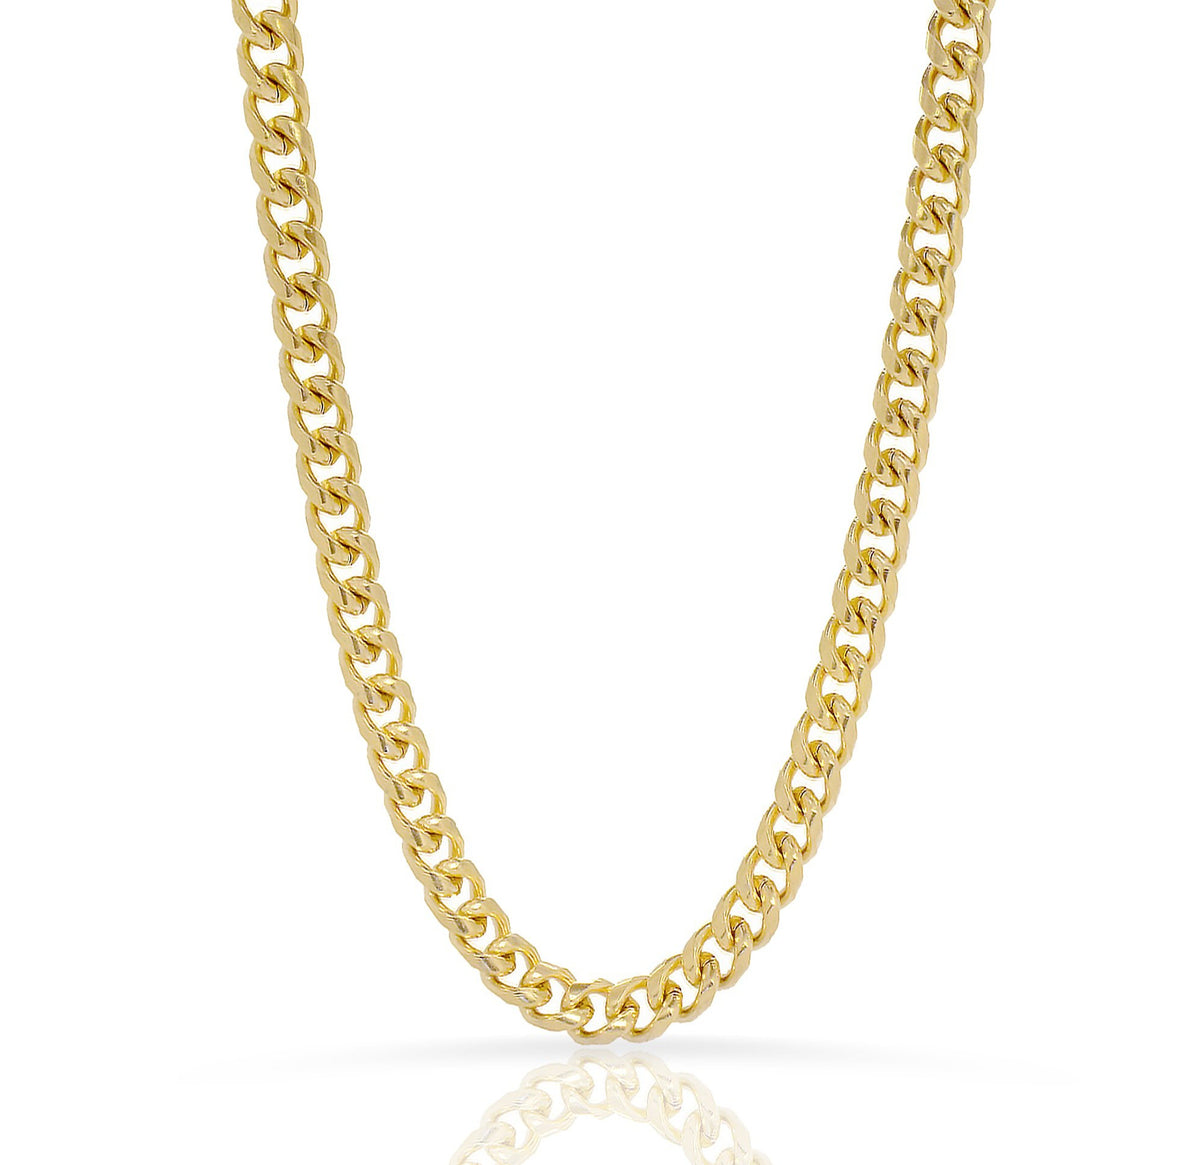 large gold chain necklace waterproof jewelry gold